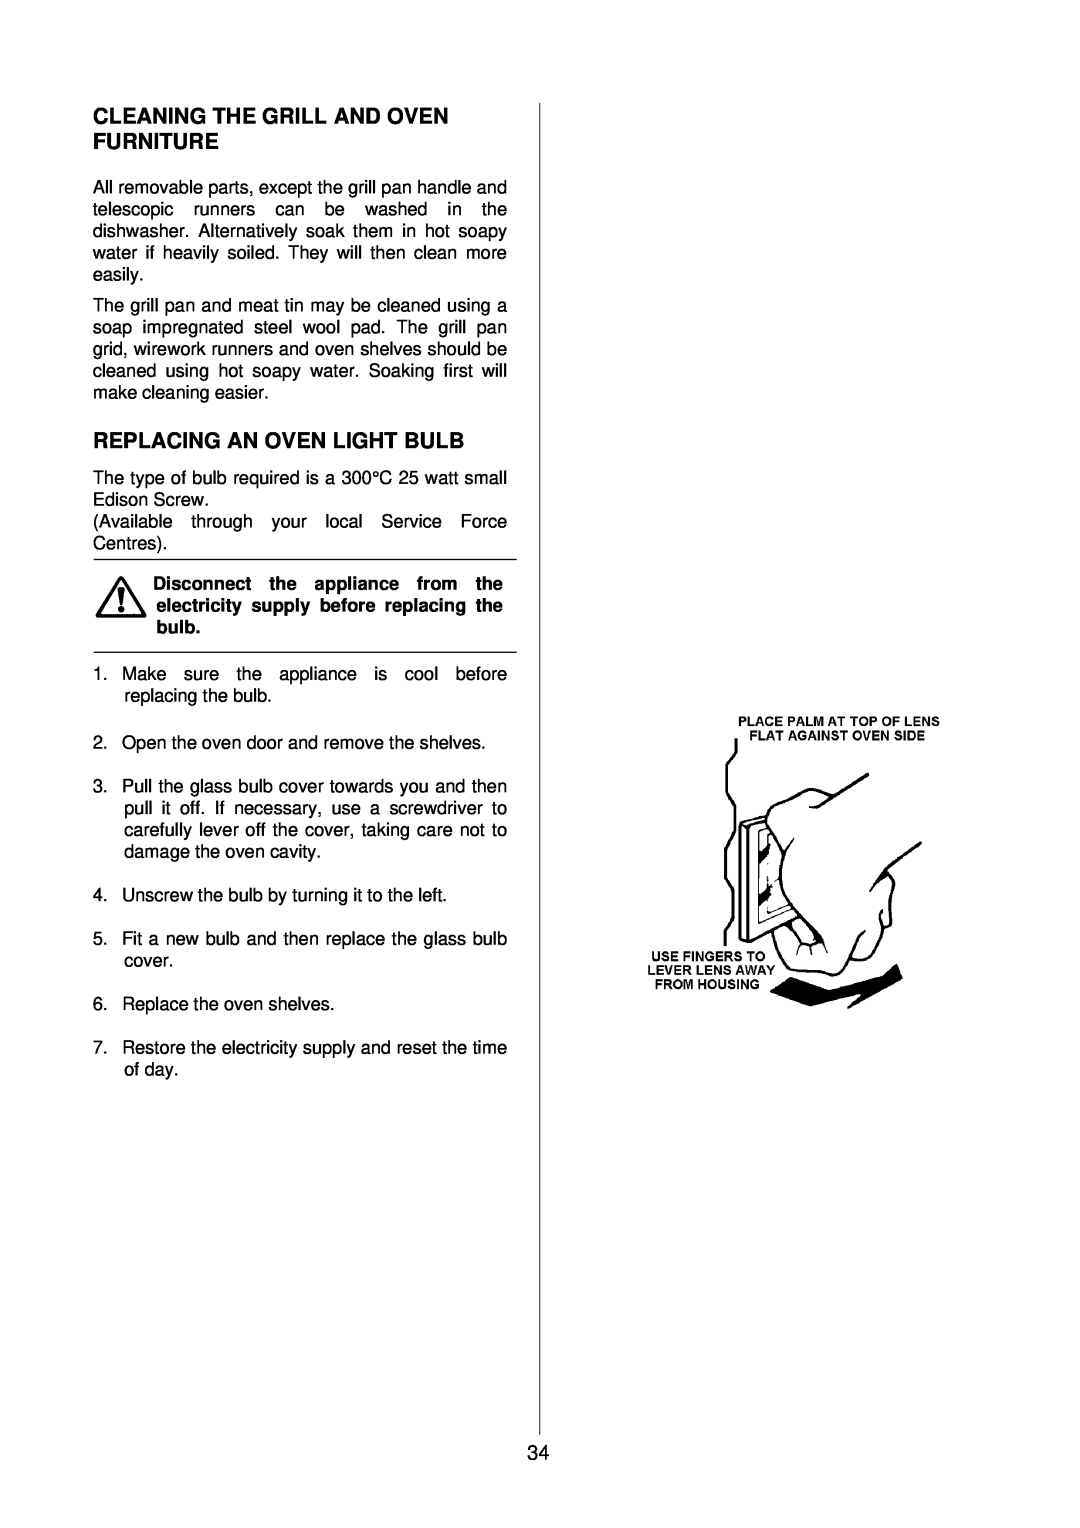 Electrolux D4100-1 operating instructions Cleaning The Grill And Oven Furniture, Replacing An Oven Light Bulb 